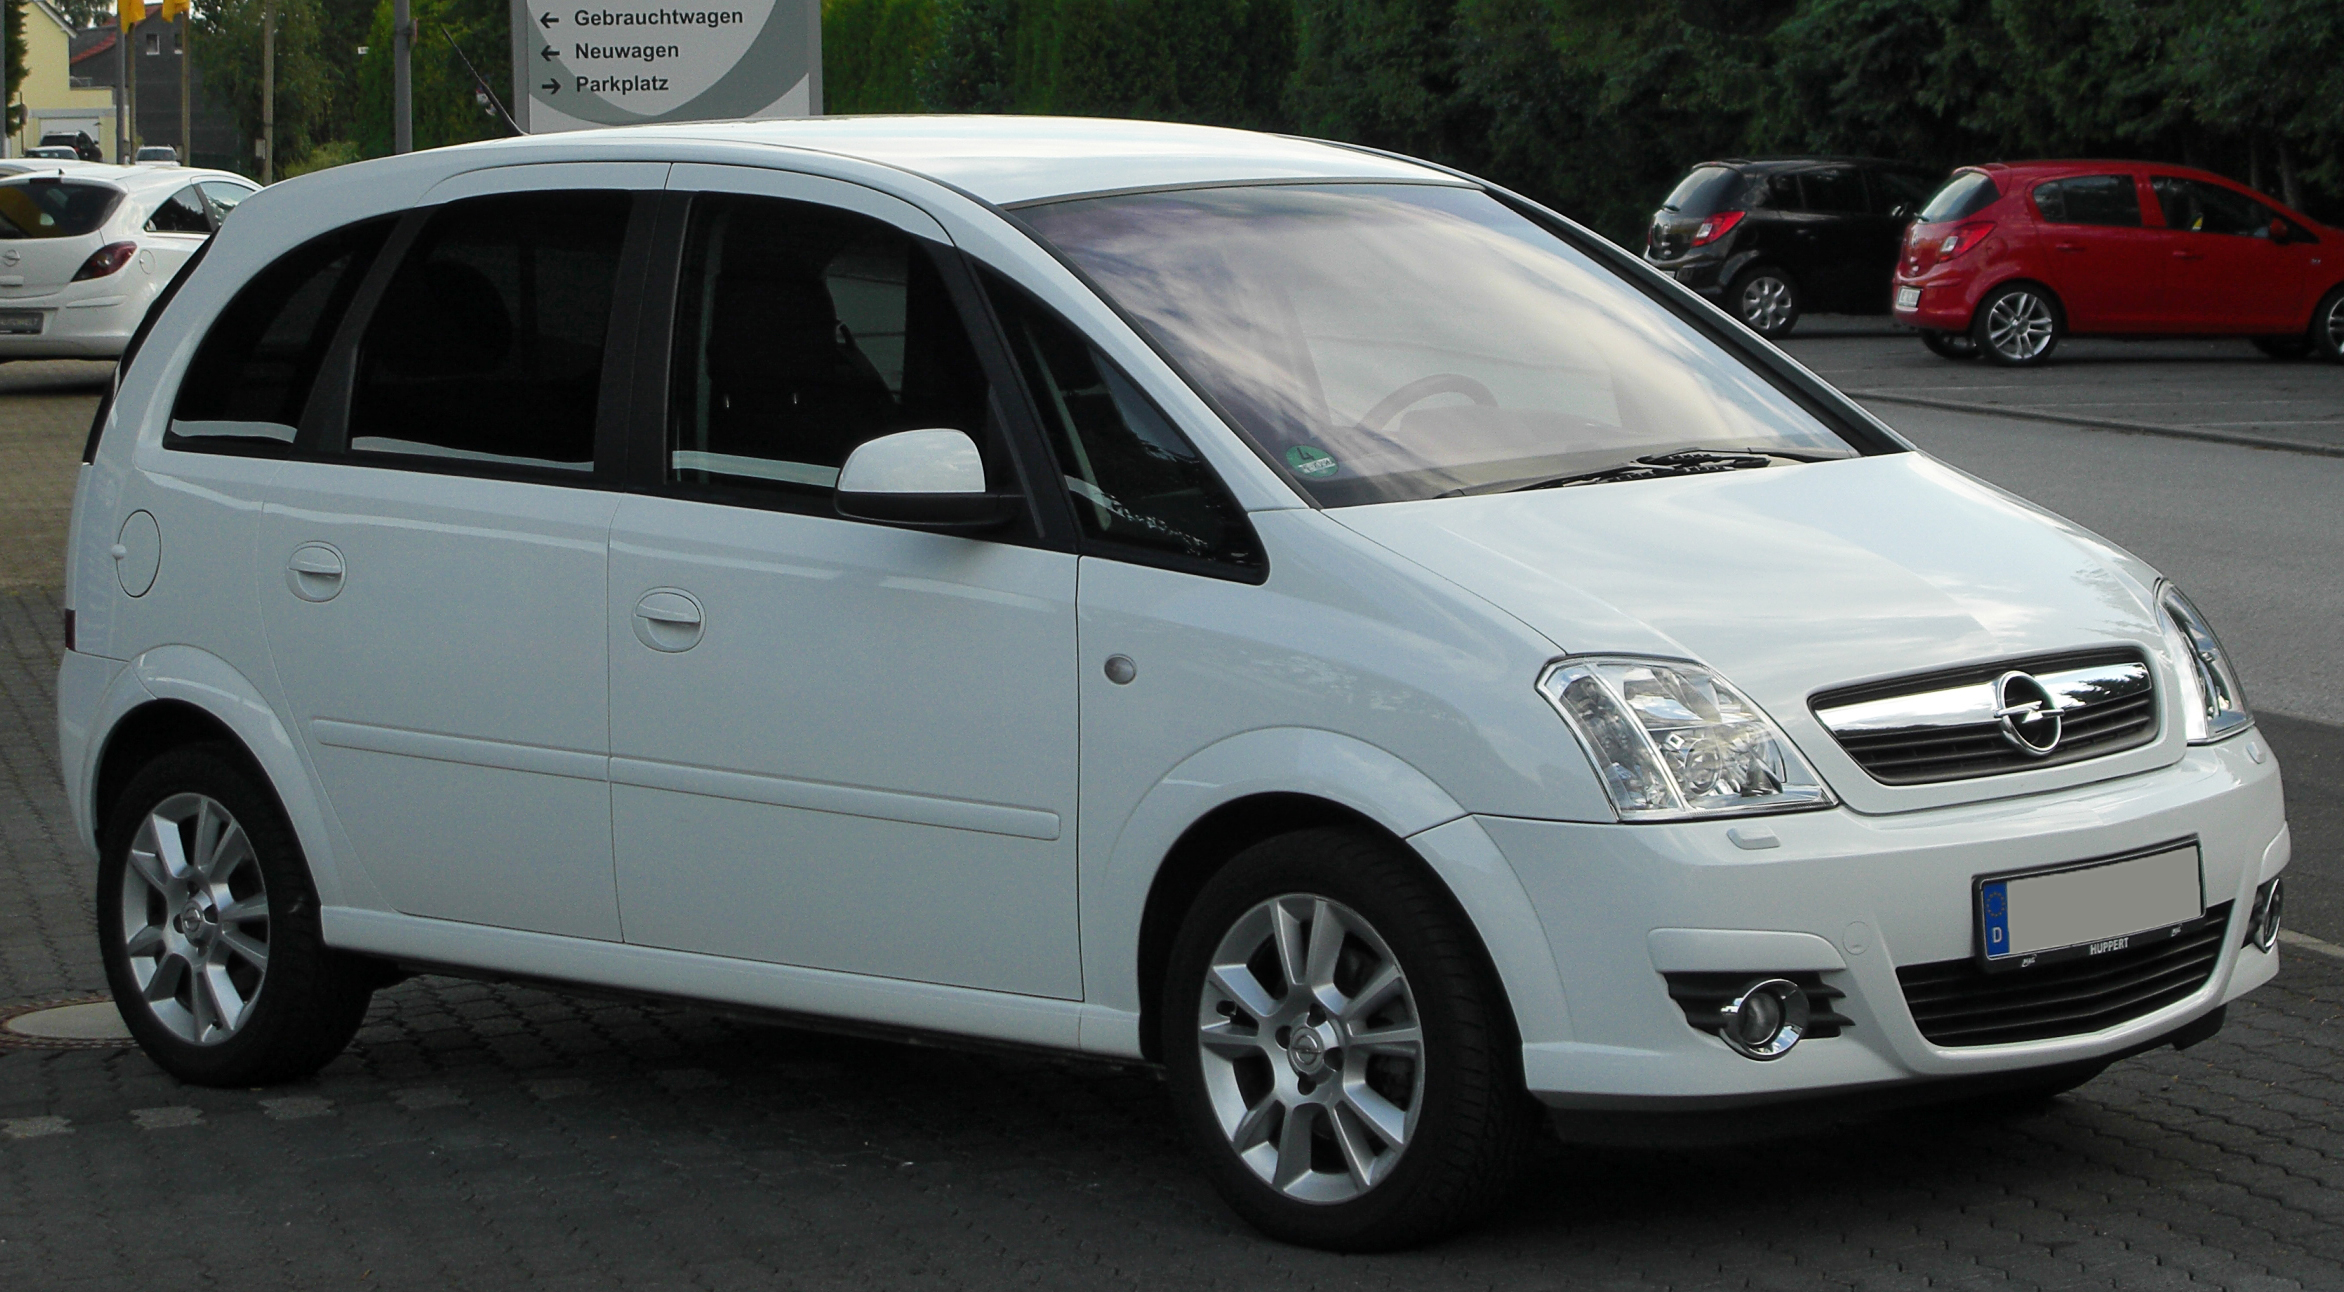 File:Opel Meriva A 1.8 Cosmo Facelift front-1 20100716.jpg - Wikimedia  Commons